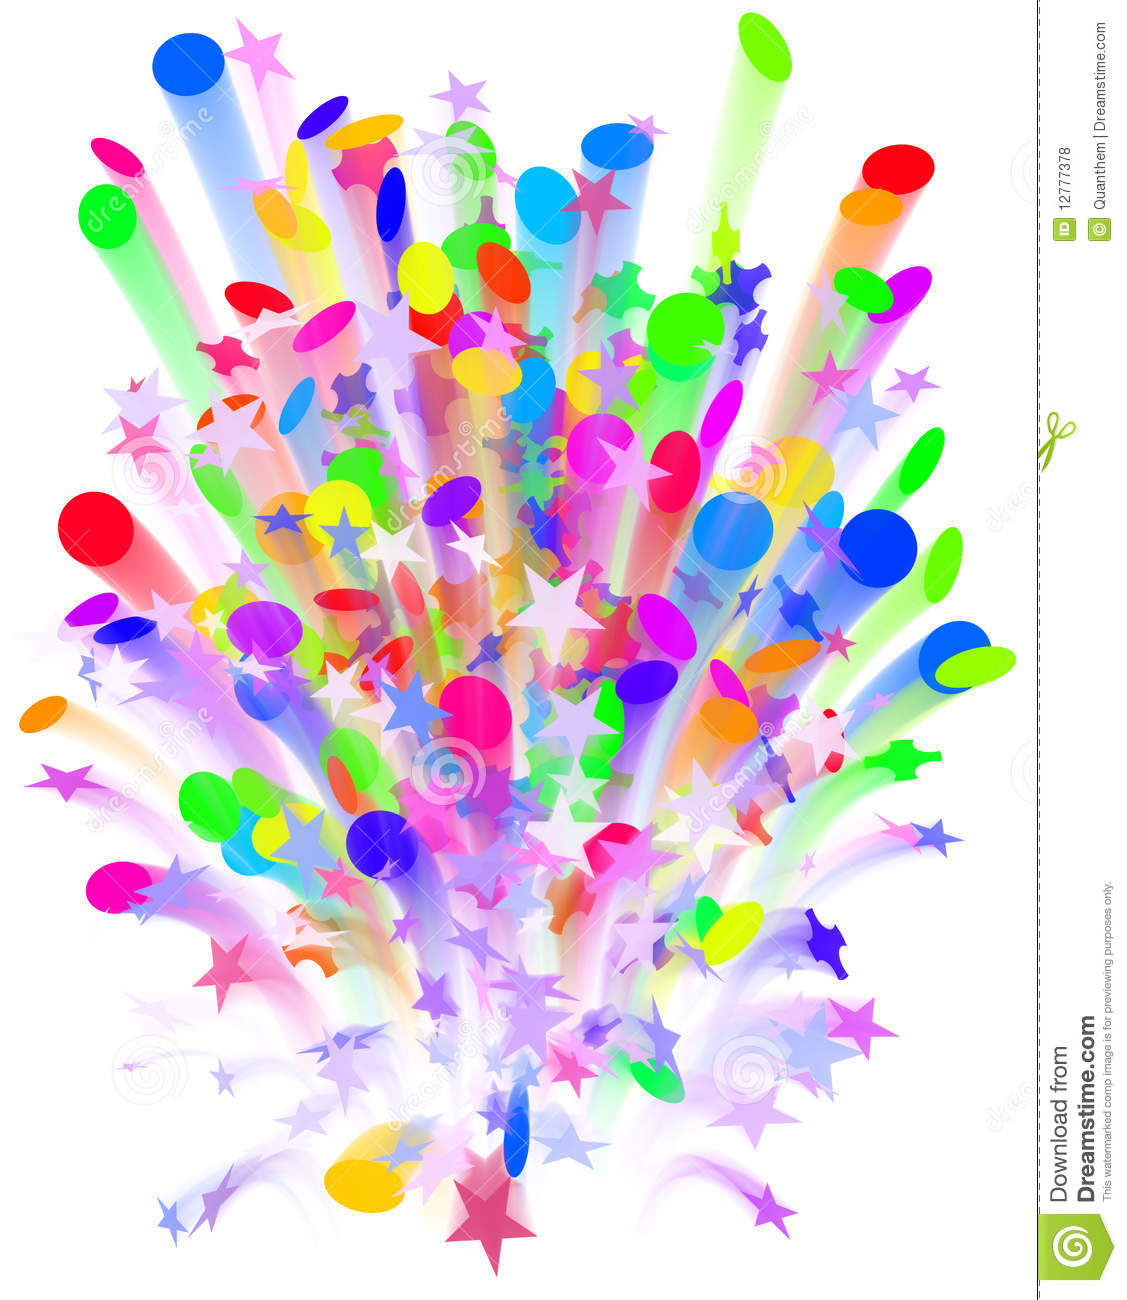 Confetti Carnival Explosion Royalty Free Stock Photos   Image